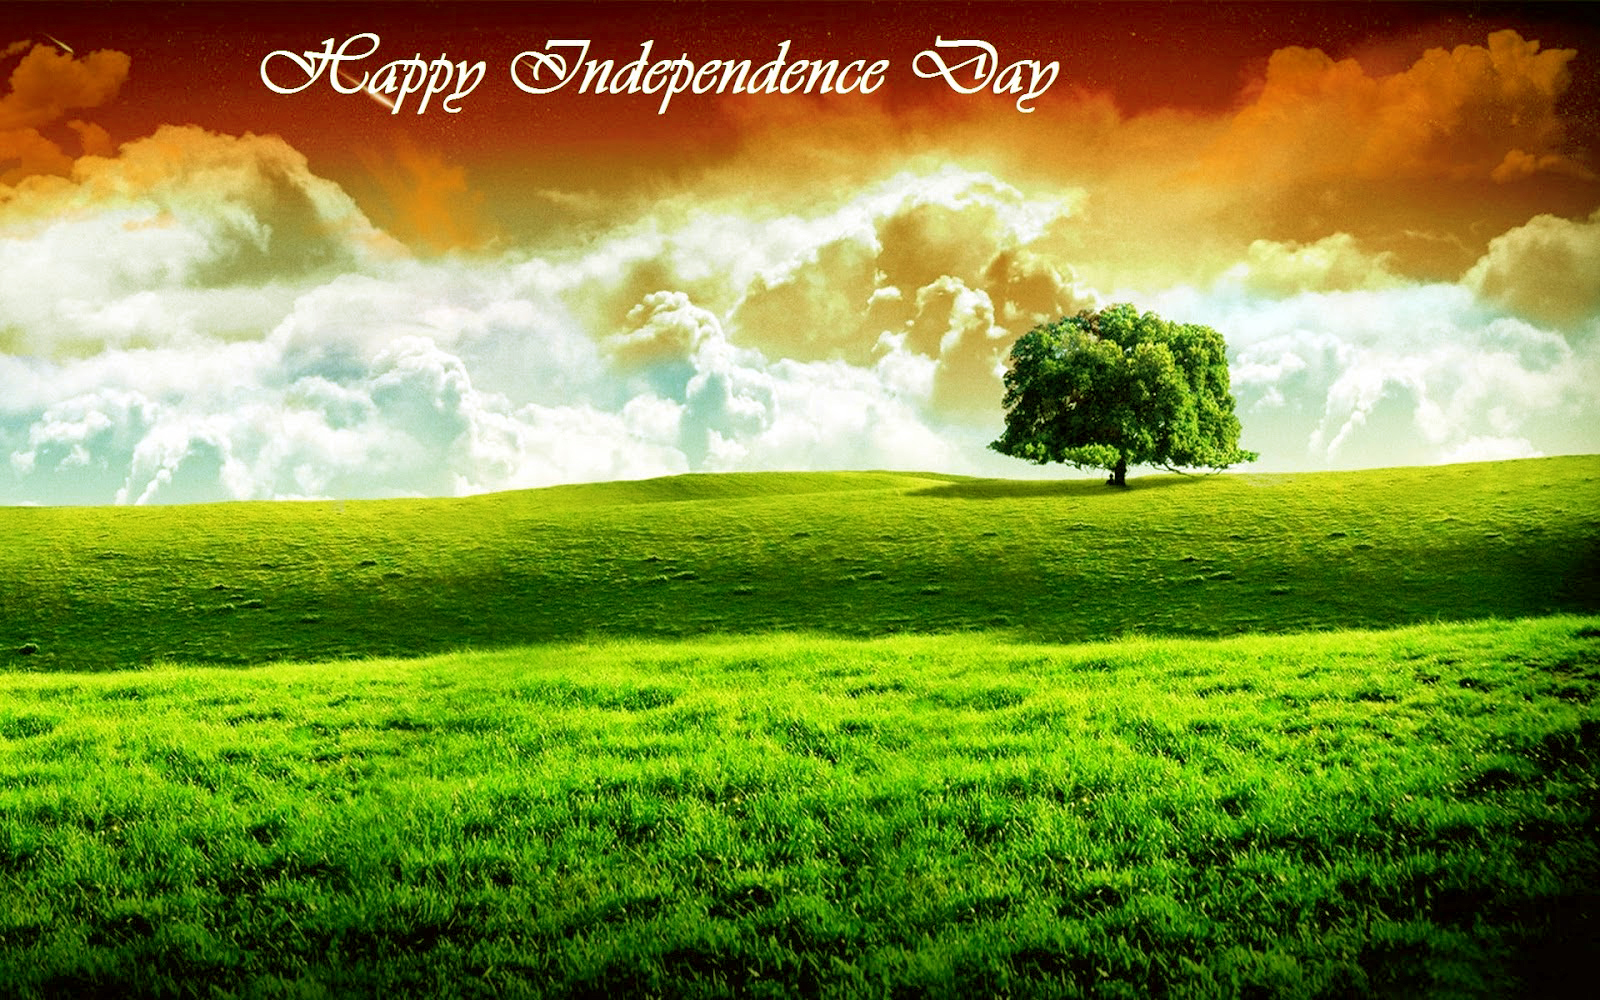 https://www.techicy.com/wp-content/uploads/2015/08/India-Independence-Day-hd-Images-wallpapers-6.jpg